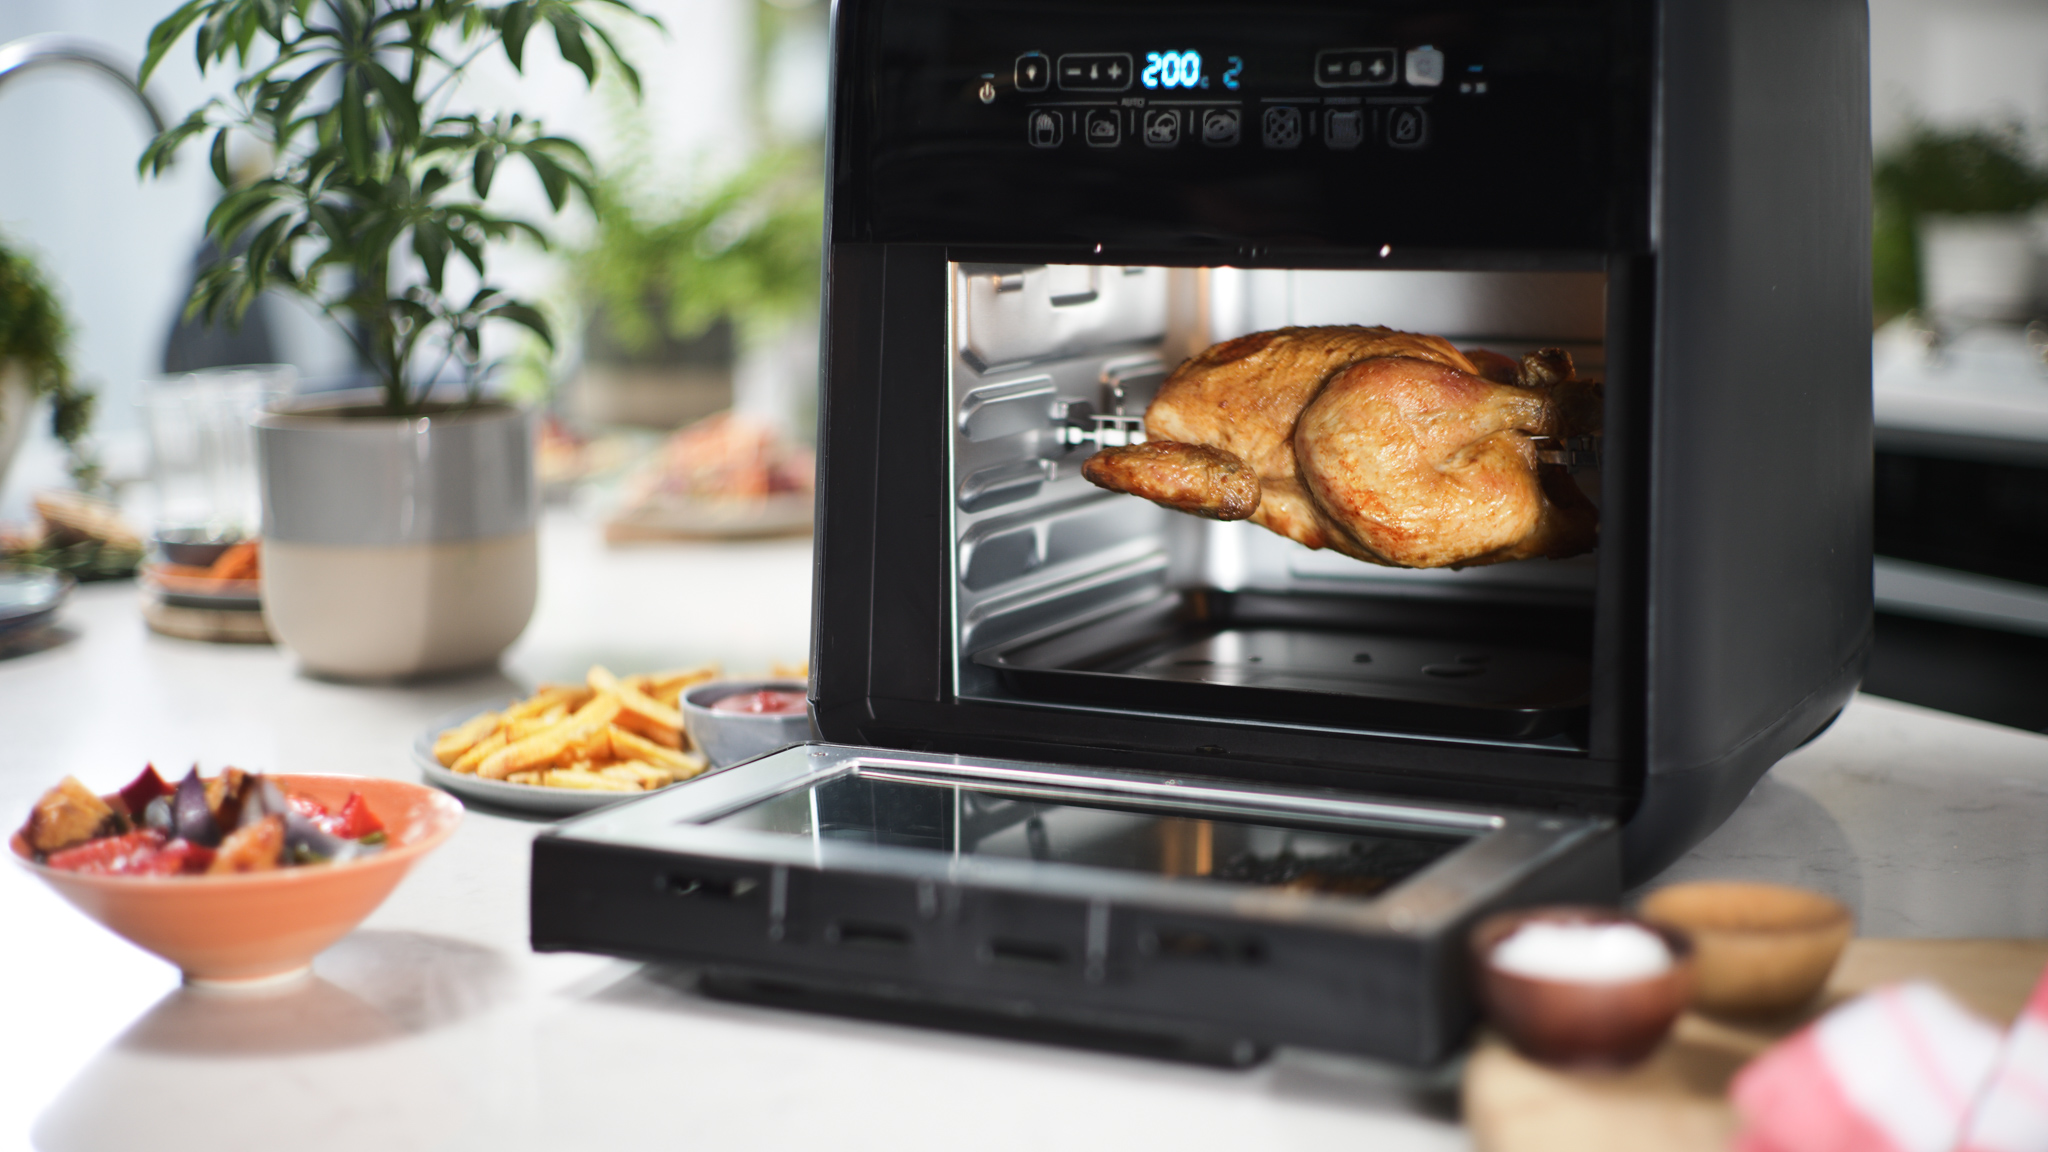 What to cook in an air fryer roast chicken by Breville